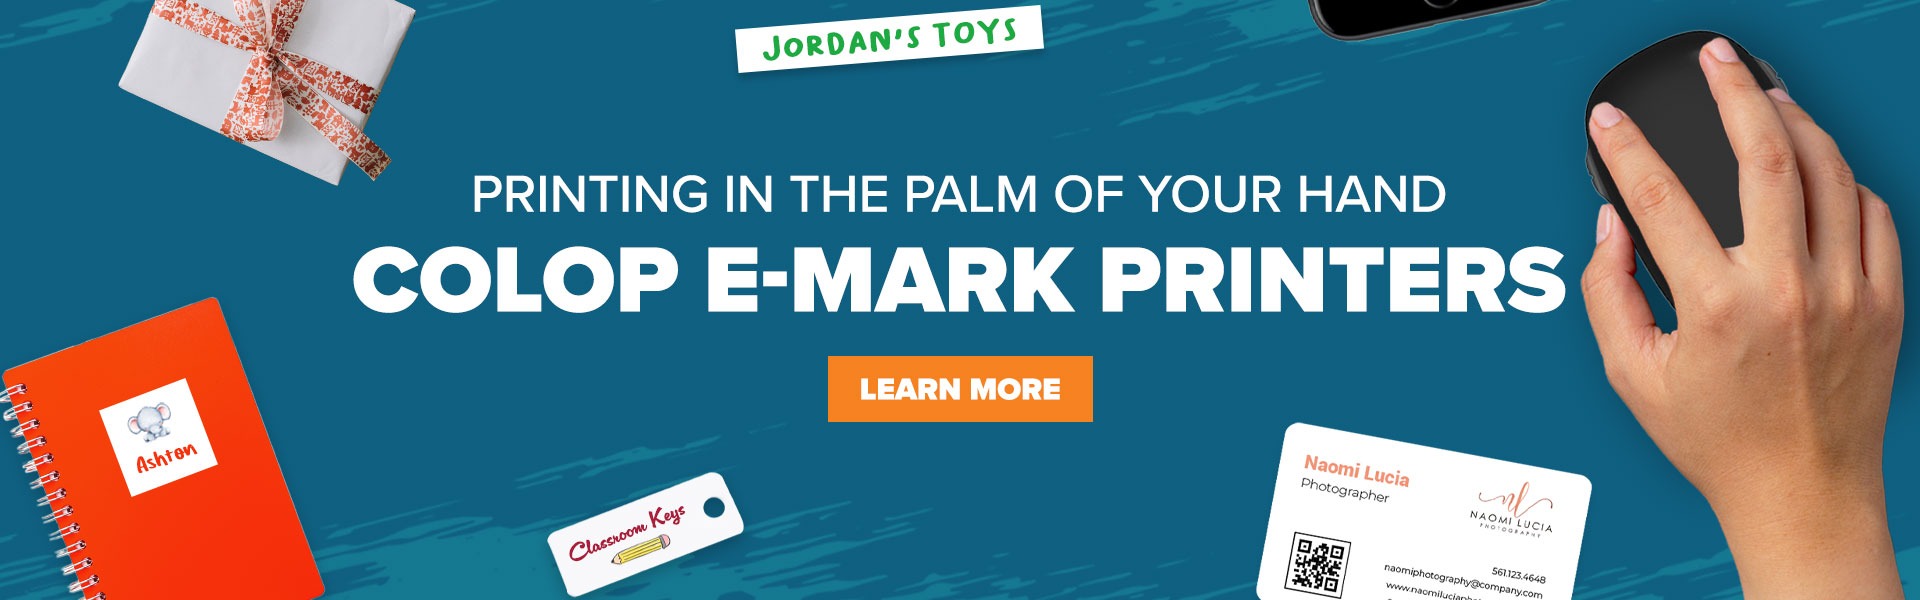 Printing in the palm of your hand: Colop E-mark printers